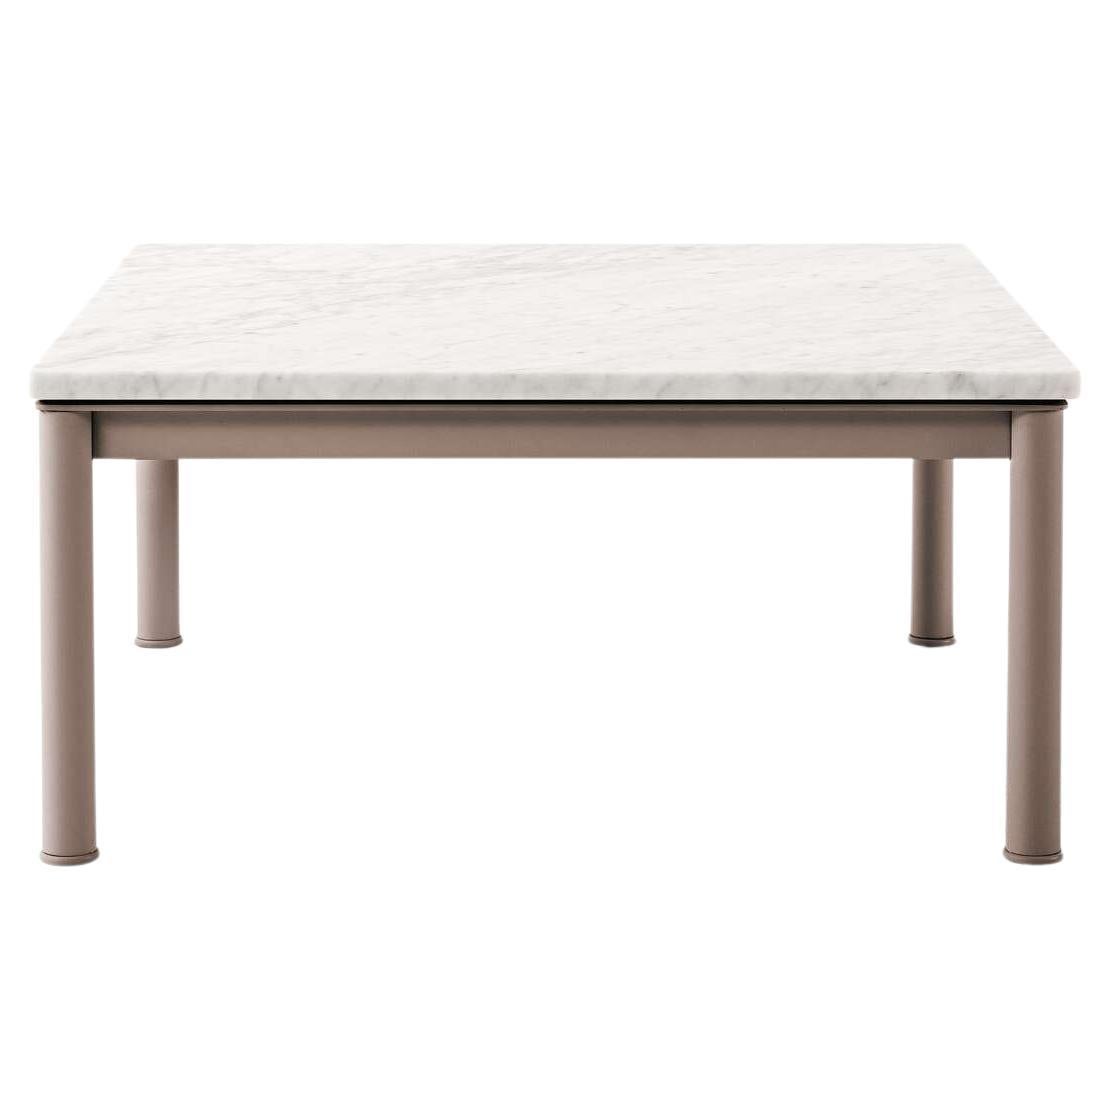 Le Corbusier, Pierre Jeanneret, Charlotte Perriand LC10 Table for Cassina